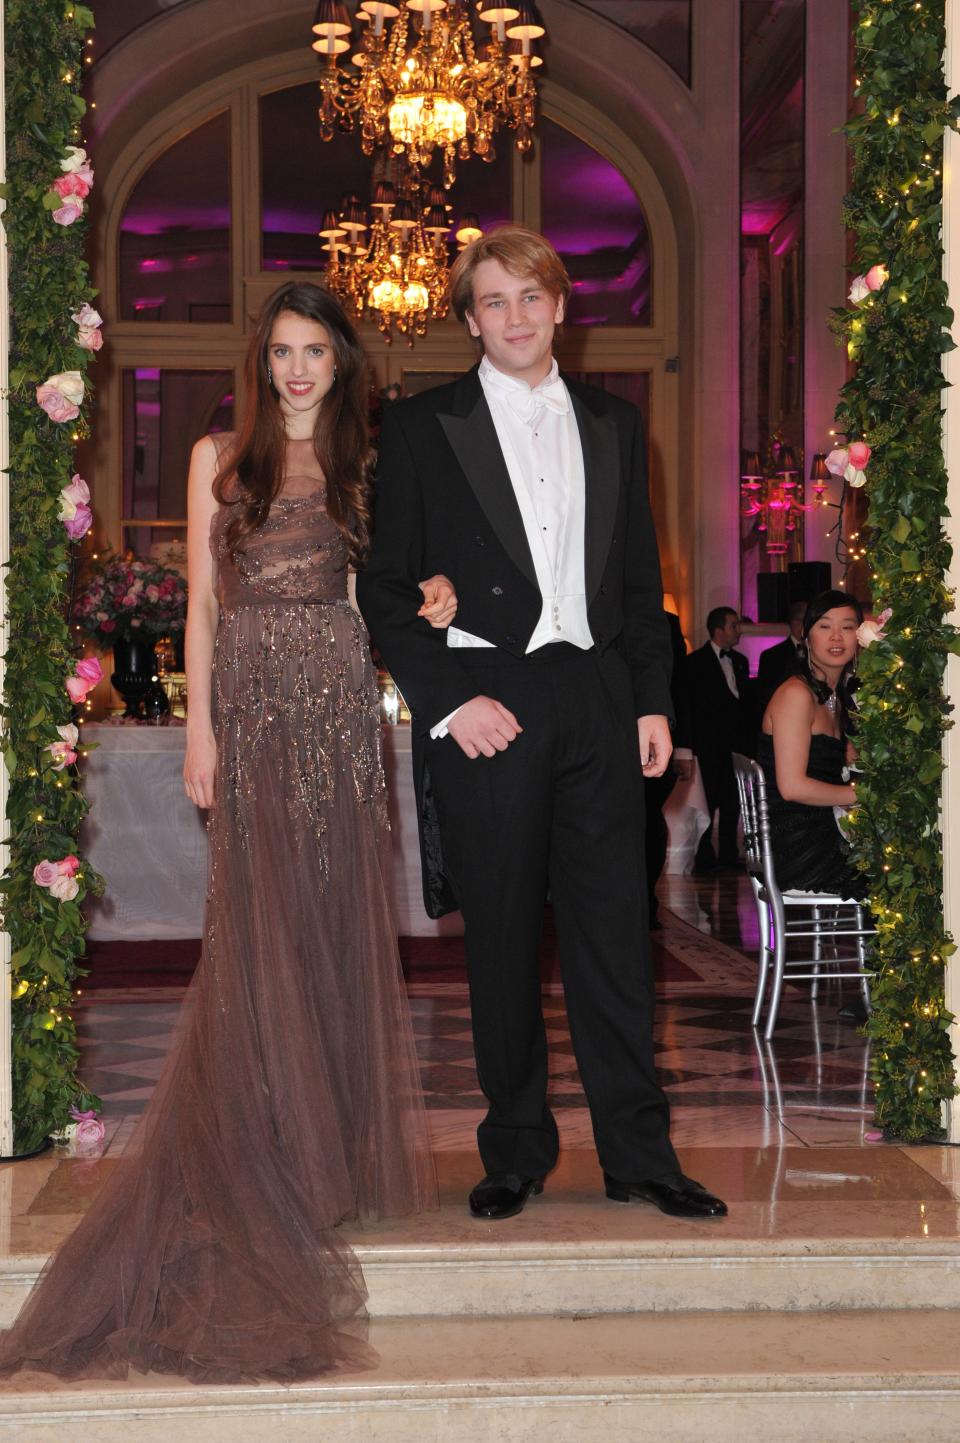 American actress Margaret Qualley is pictured at Le Bal with her date Count Filippo Emo Capodilista of Italy.